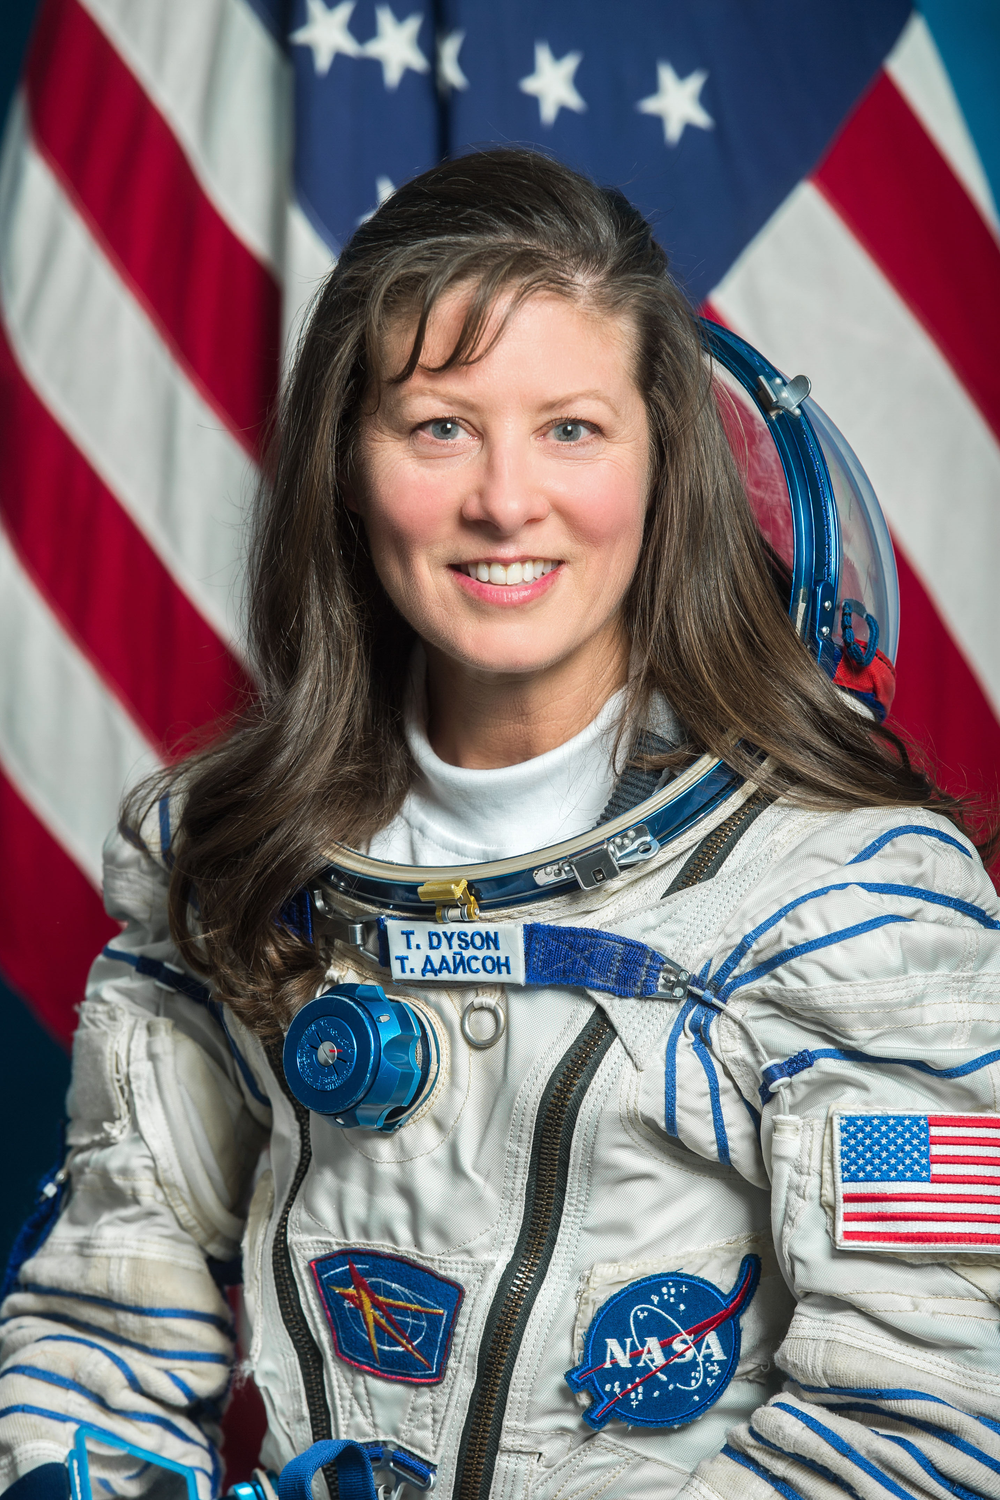 A female astronaut is pictured in a Russian spacesuit with an American flag in the background.